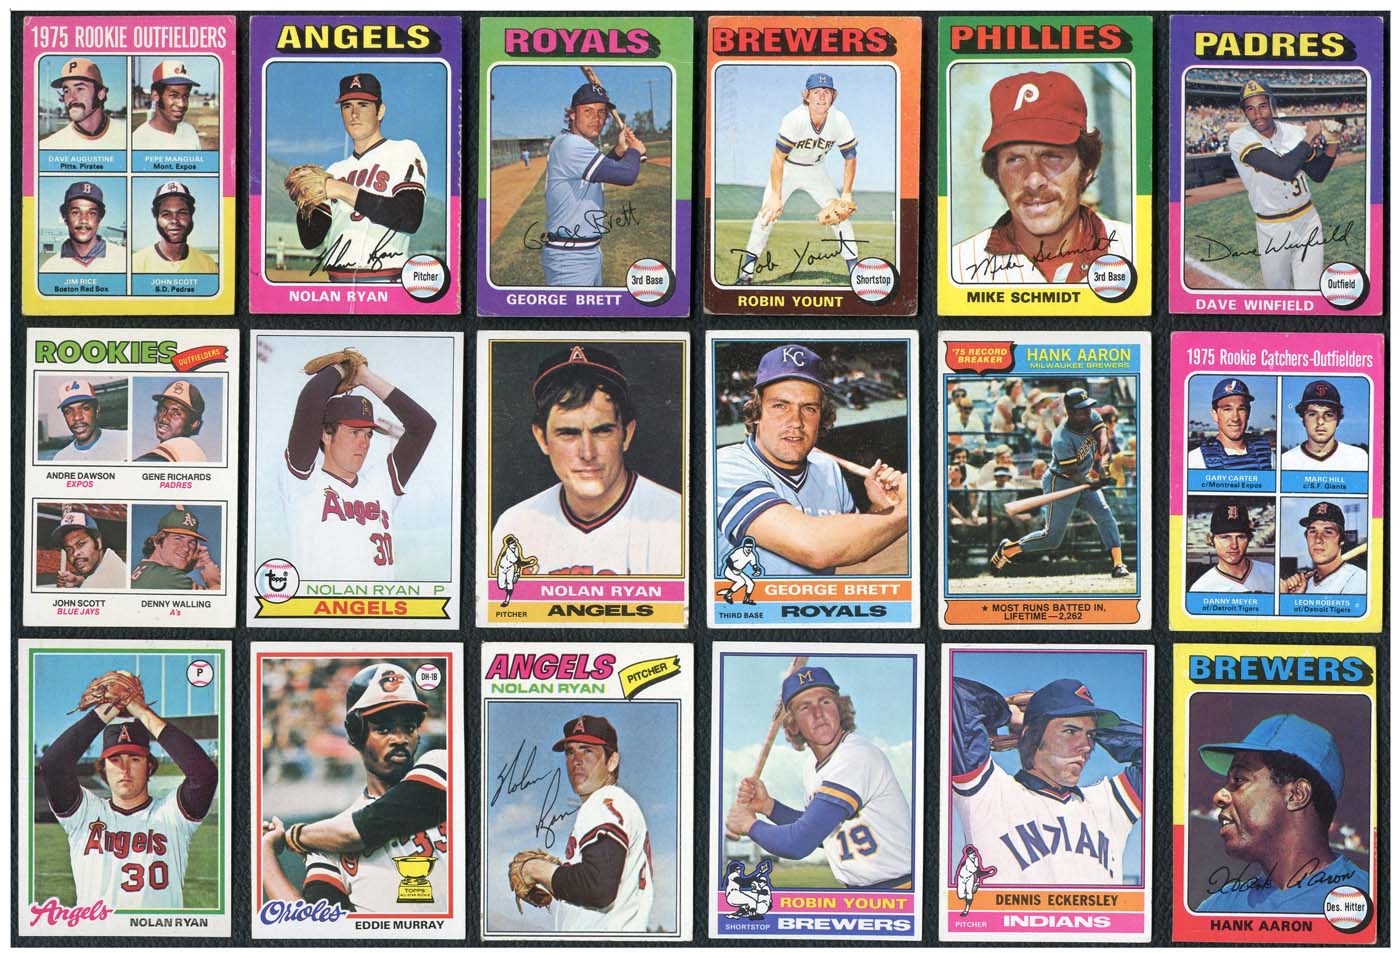 1975-1988 Topps, Fleer and Donruss Complete Sets (27)